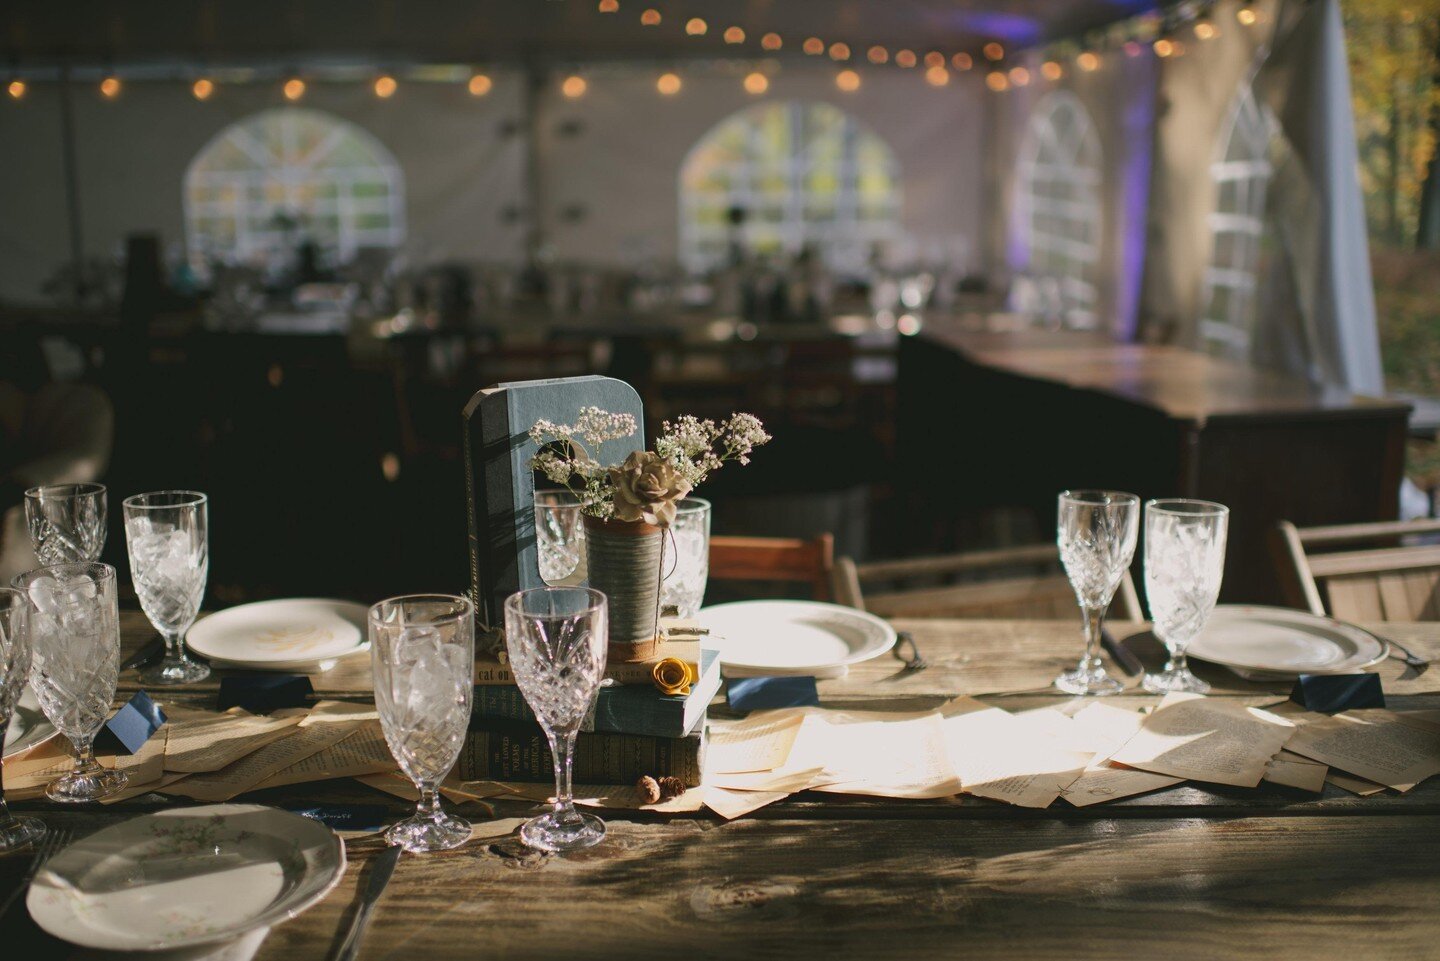 We provide the tables, you provide the decor that reflects your personal style
⠀
...
⠀
#forestwedding #forestreception #tentwedding #outdoorwedding #wedding #mnwedding #minnesotawedding #mnweddingvenue #minnsotavenue #weddinginspiration #weddingday #